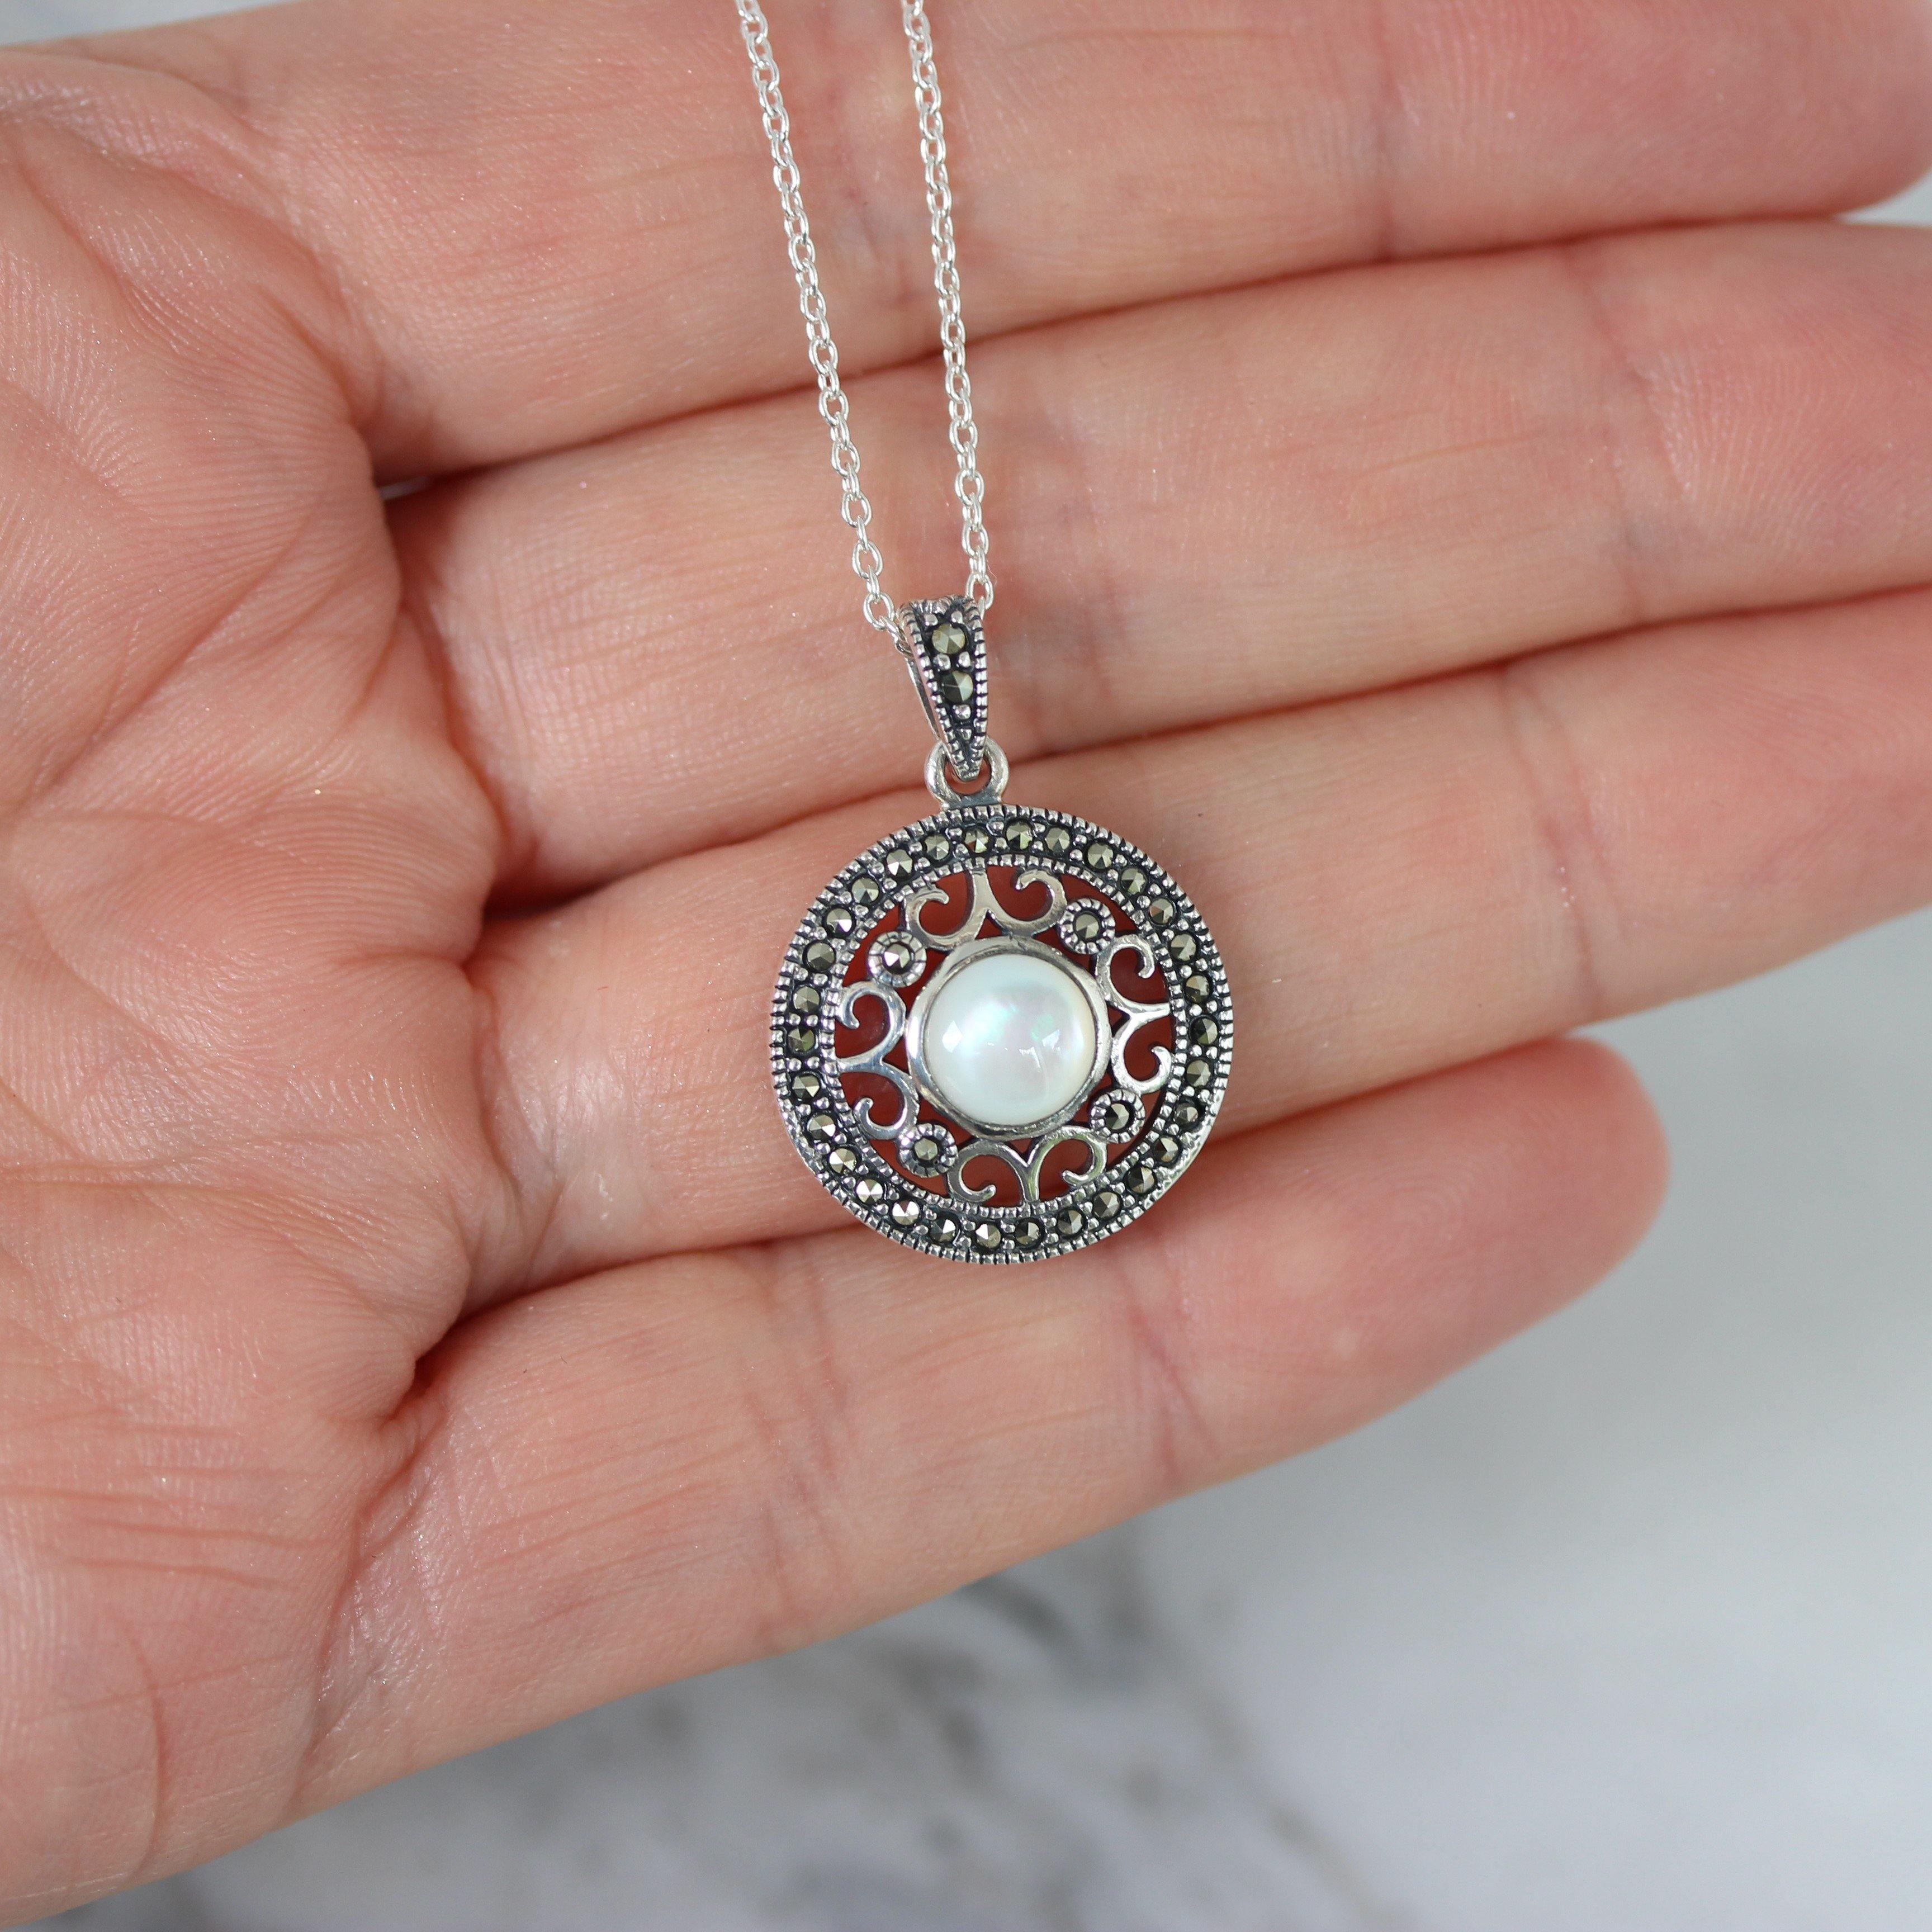 Sterling Silver Marcasite & Mother Of Pearl Round Filigree Pendant Necklace 42cm - STERLING SILVER DESIGNS